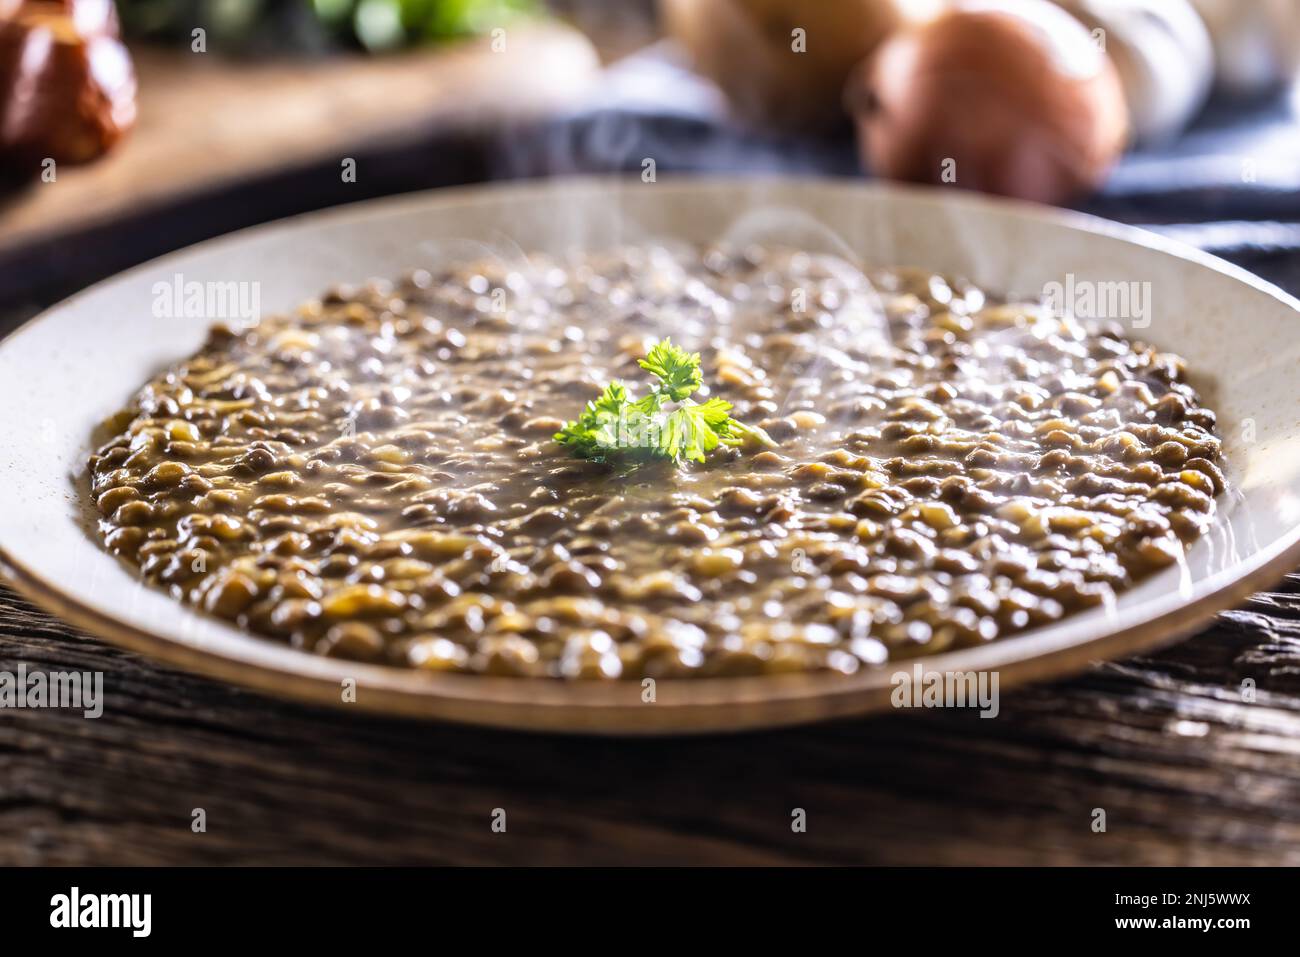 A bowl full of lentil soup with potatoes. Healthy legume food. Stock Photo